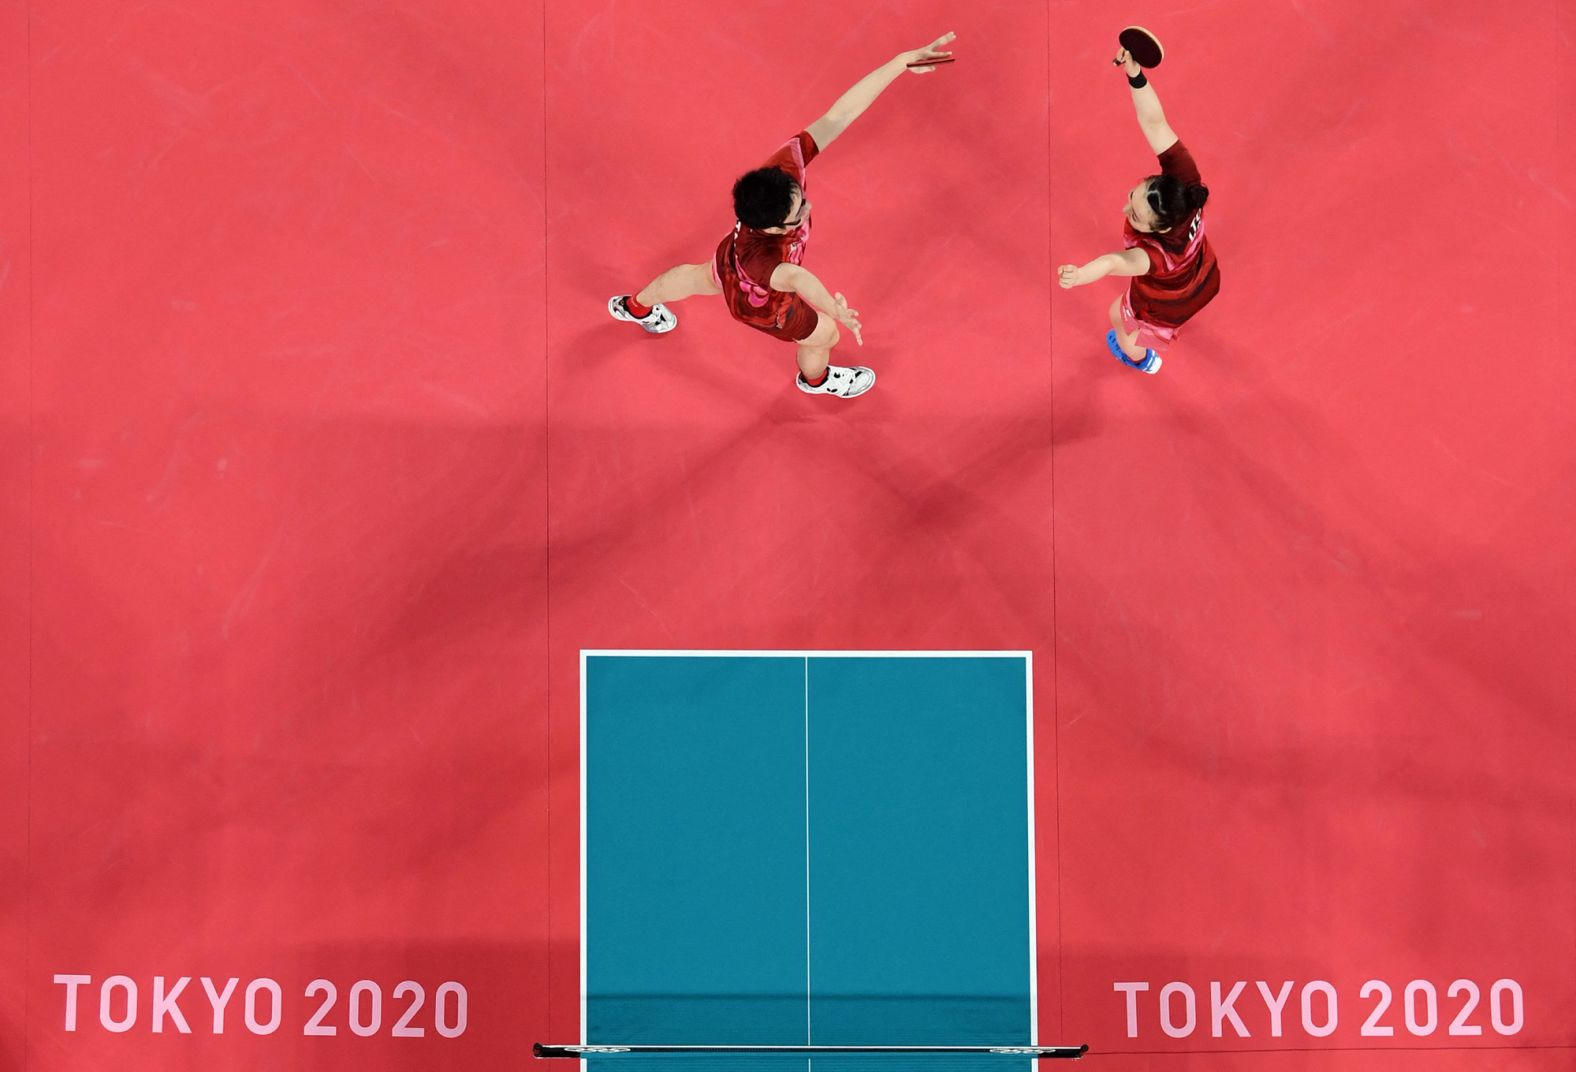 Japanese table-tennis players Jun Mizutani, left, and Mima Ito celebrate <a href="index.php?page=&url=https%3A%2F%2Fwww.cnn.com%2Fworld%2Flive-news%2Ftokyo-2020-olympics-07-26-21-spt%2Fh_321ddbea93f900e73308f3c94c4b6015" target="_blank">their dramatic victory</a> over China in the mixed-doubles final on July 26. Mizutani and Ito came back from two sets down to win 4-3, clinching the final set 11-6. The win ended years of Chinese dominance in the sport. China had won every Olympic title in table tennis since South Korea's Ryu Seung-min triumphed in the men's singles competition at the 2004 Athens Games.